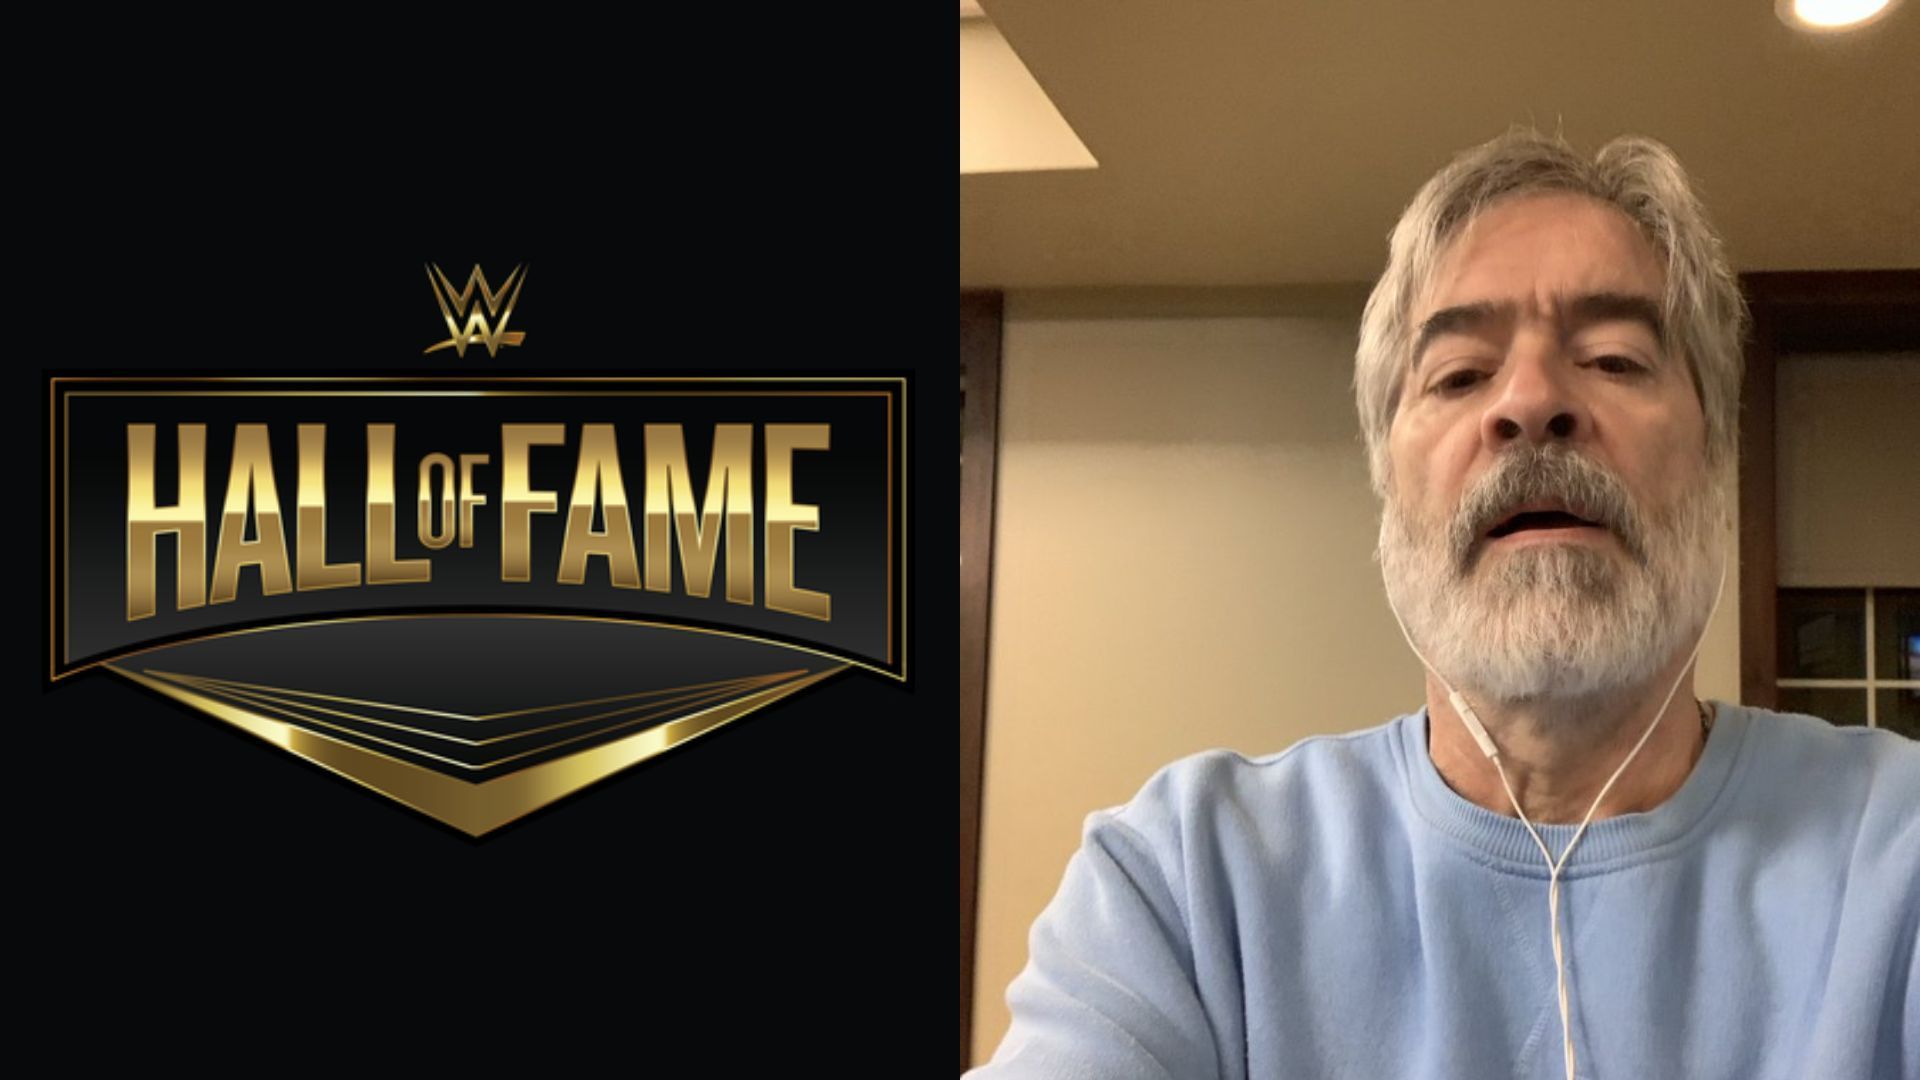 Vince Russo had some interesting things to share this week